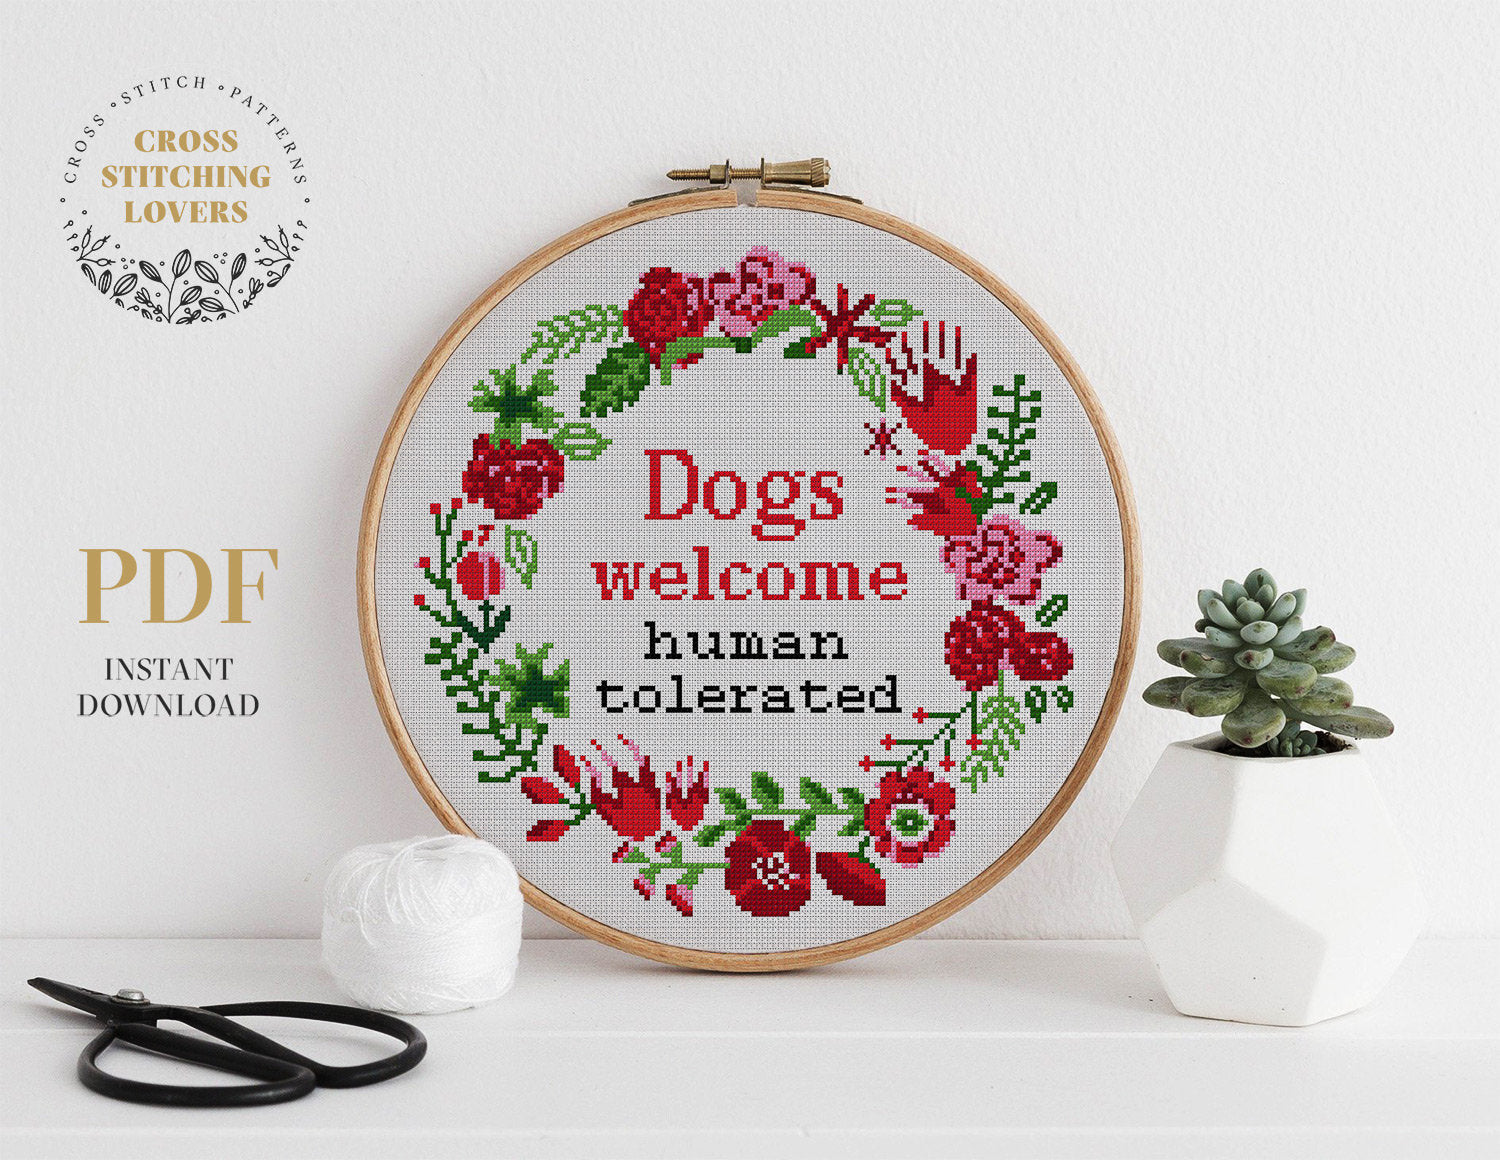 Dogs Welcome human tolerated - Cross stitch pattern